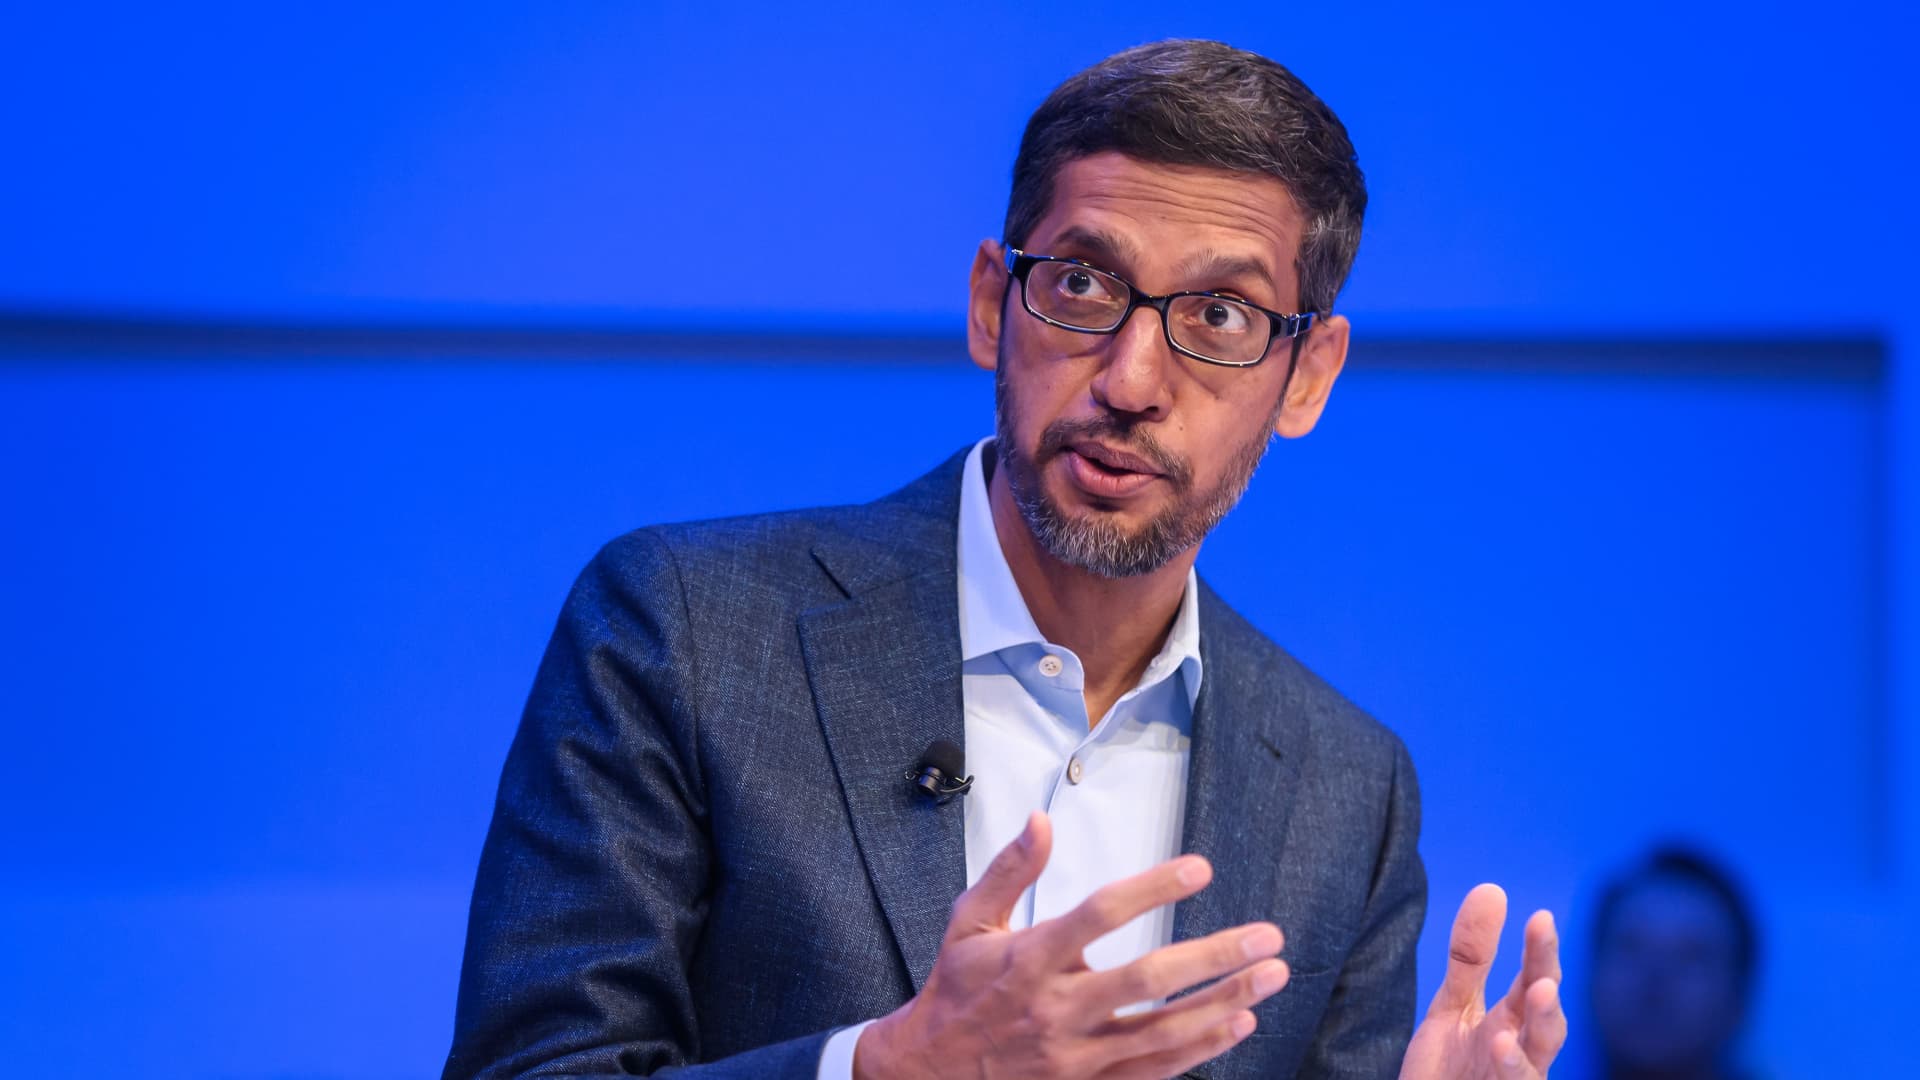 Google CEO Pichai tells employees not to 'equate fun with money' in heated all-hands meeting - CNBC